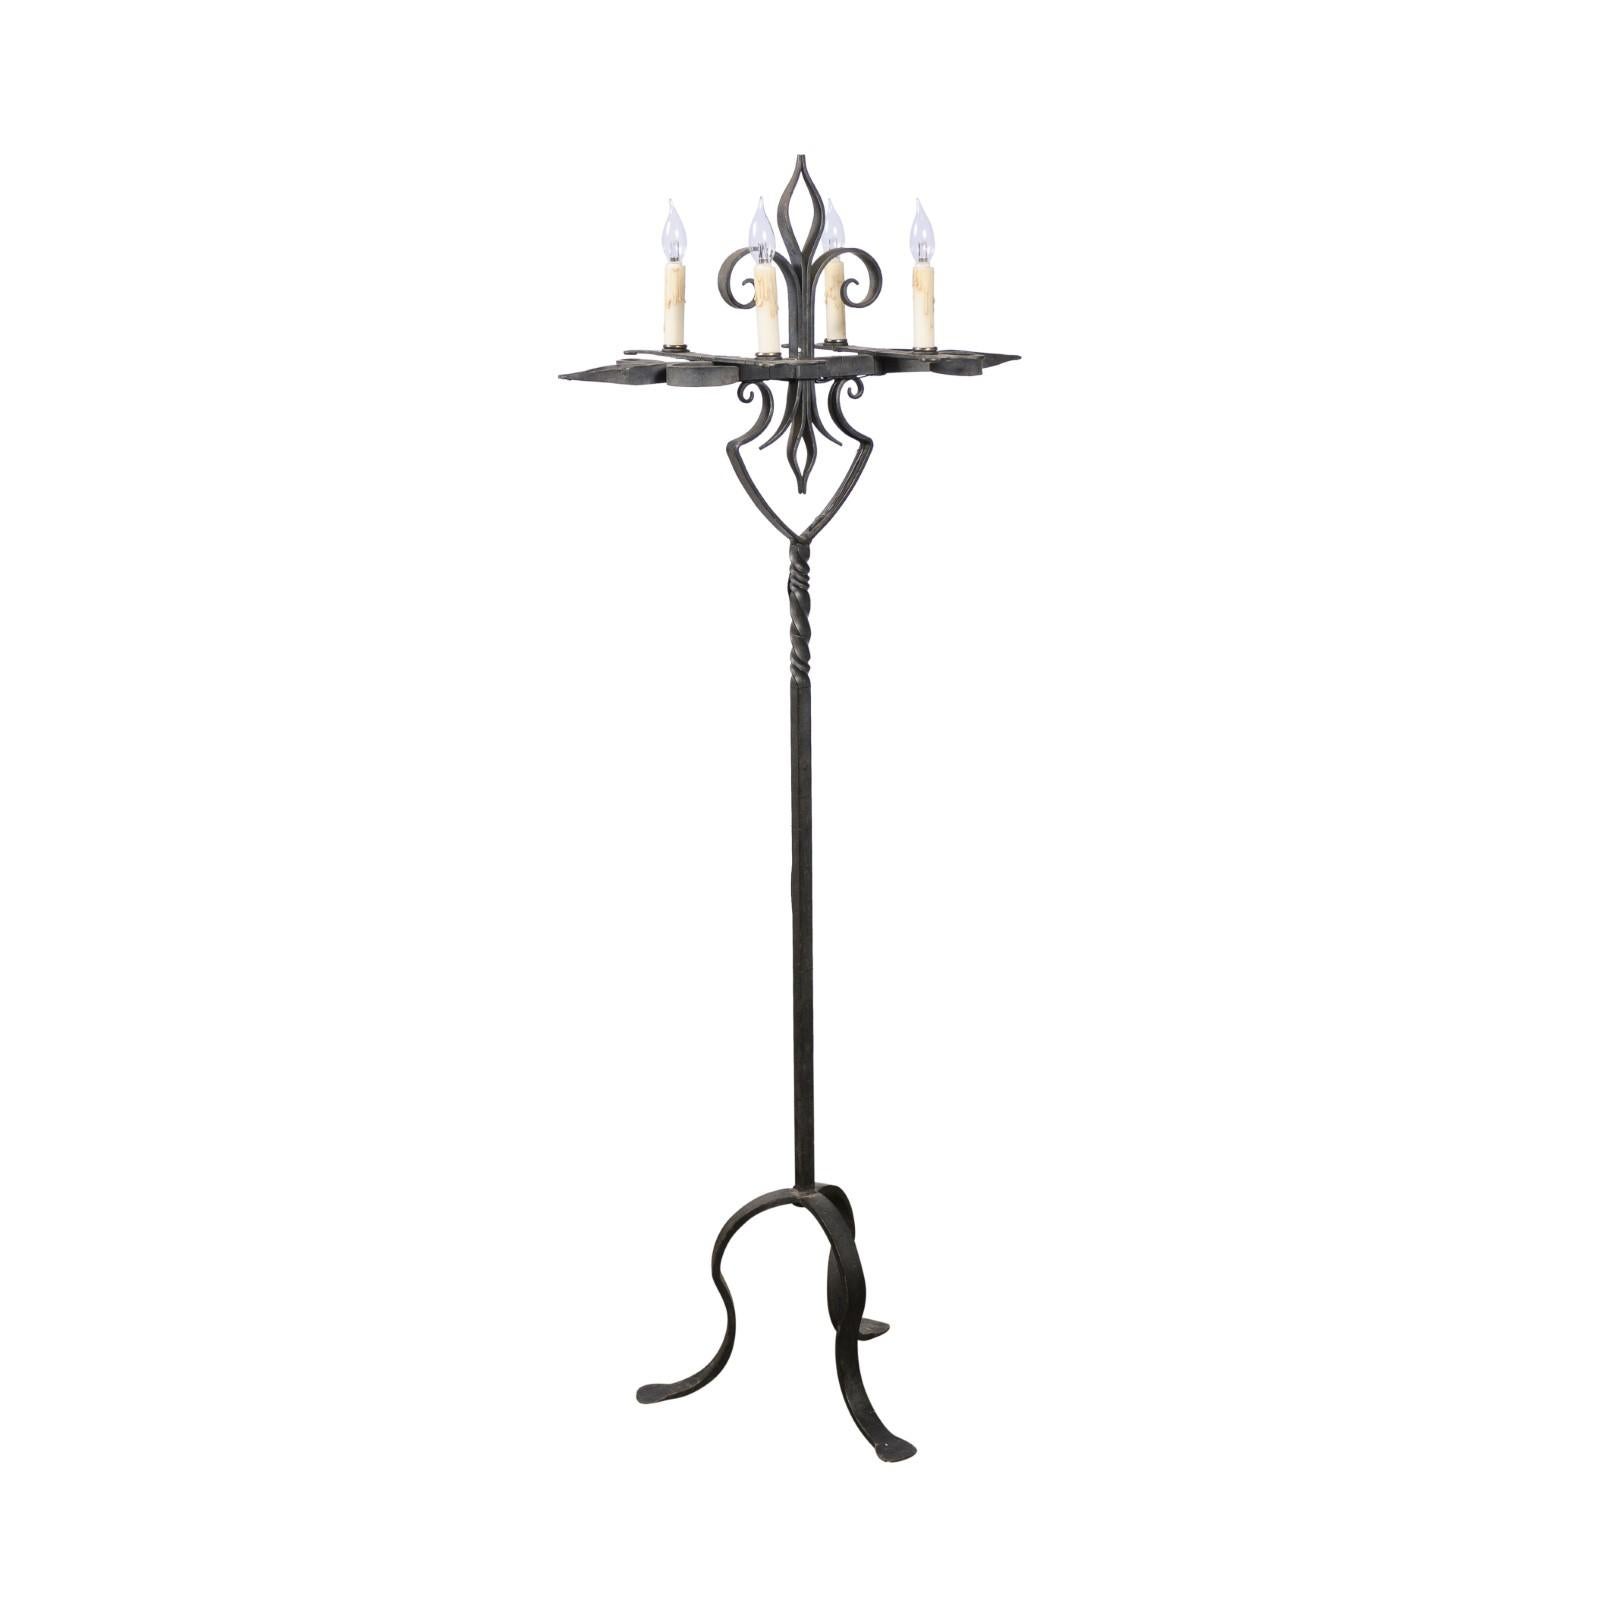 A French Turn of the Century candelabra style wrought-iron four-light floor lamp from the early 20th century, with fleur-de-lys motifs, twisted accents and tripod base. Created in France during the early years of the 20th century, this floor lamp,